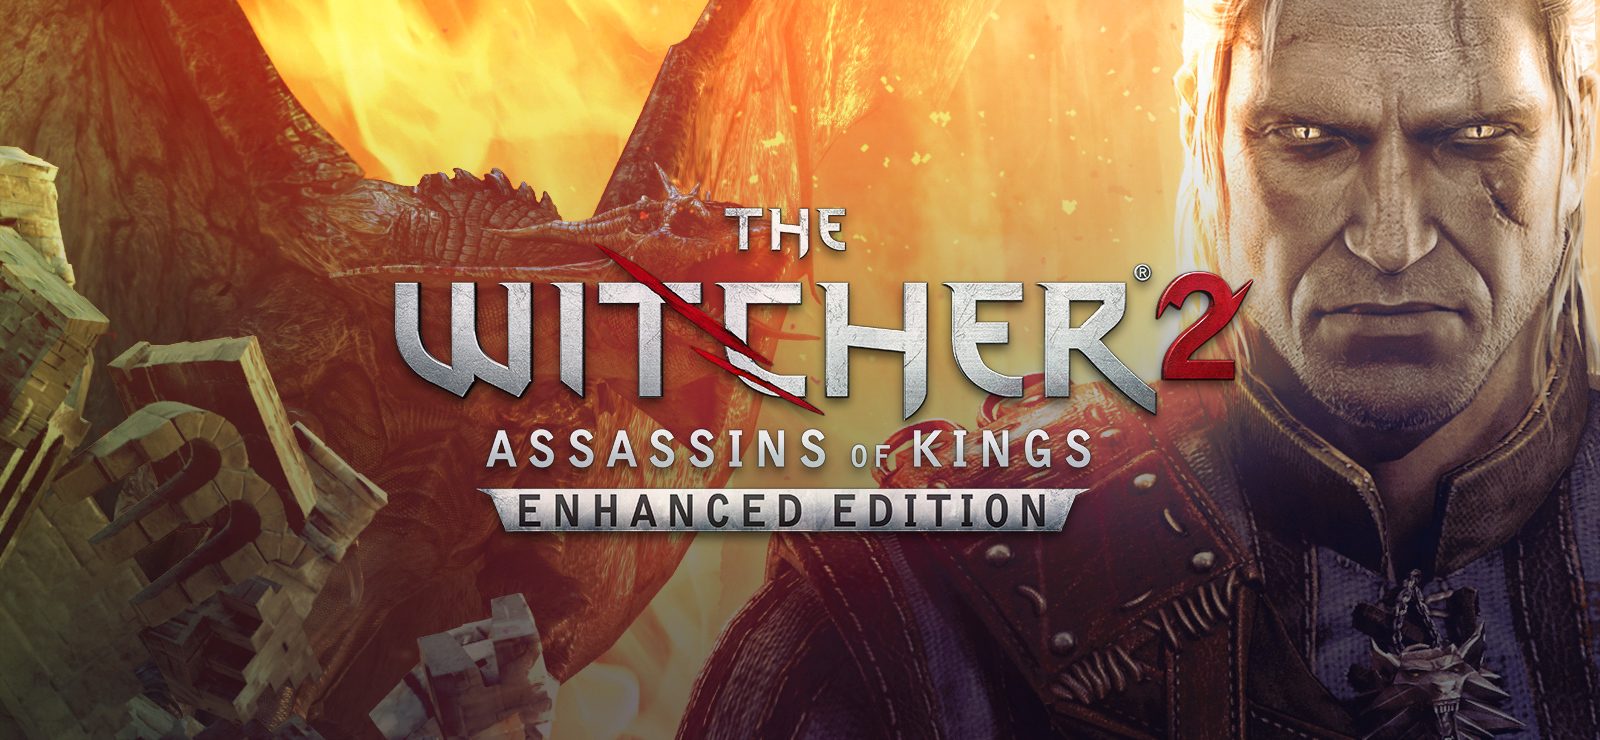 The Witcher Assassins Of Kings HD Wallpaper X